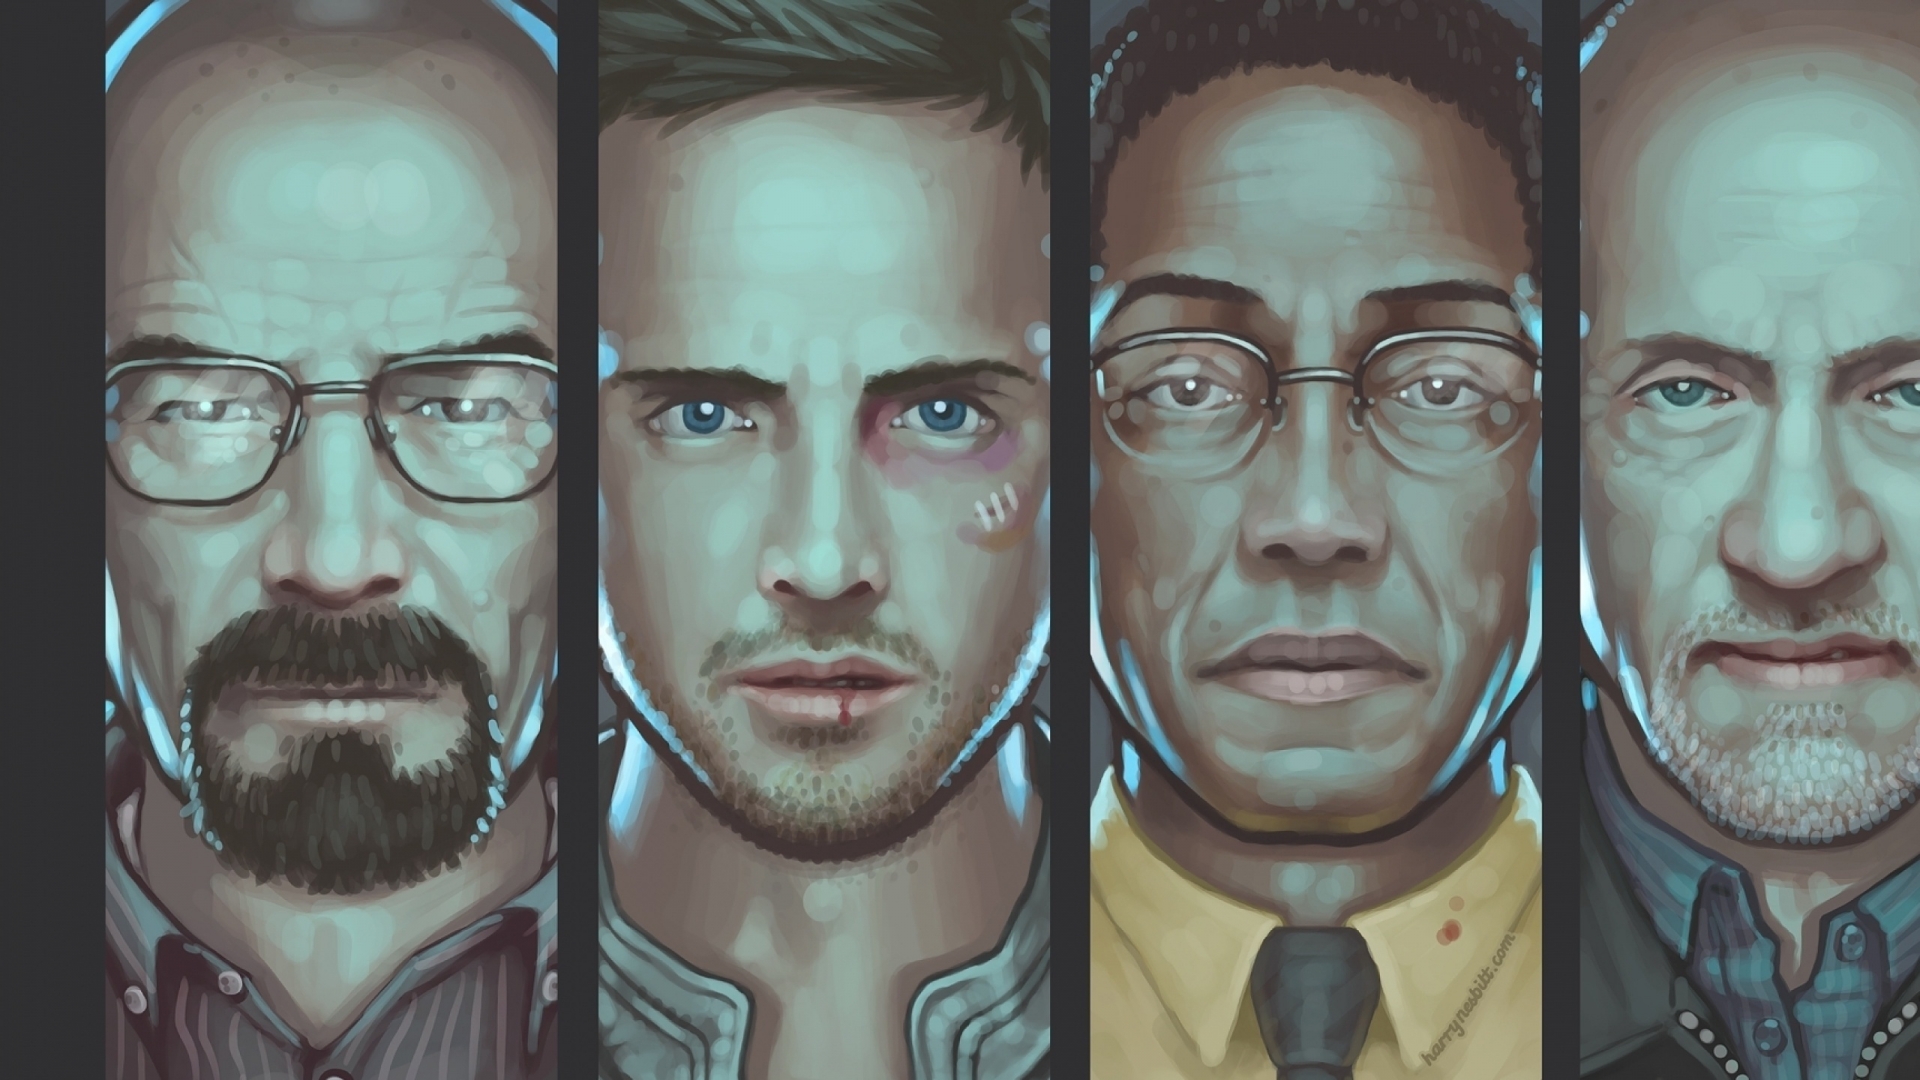 Breaking Bad Characters Artwork for 1920 x 1080 HDTV 1080p resolution